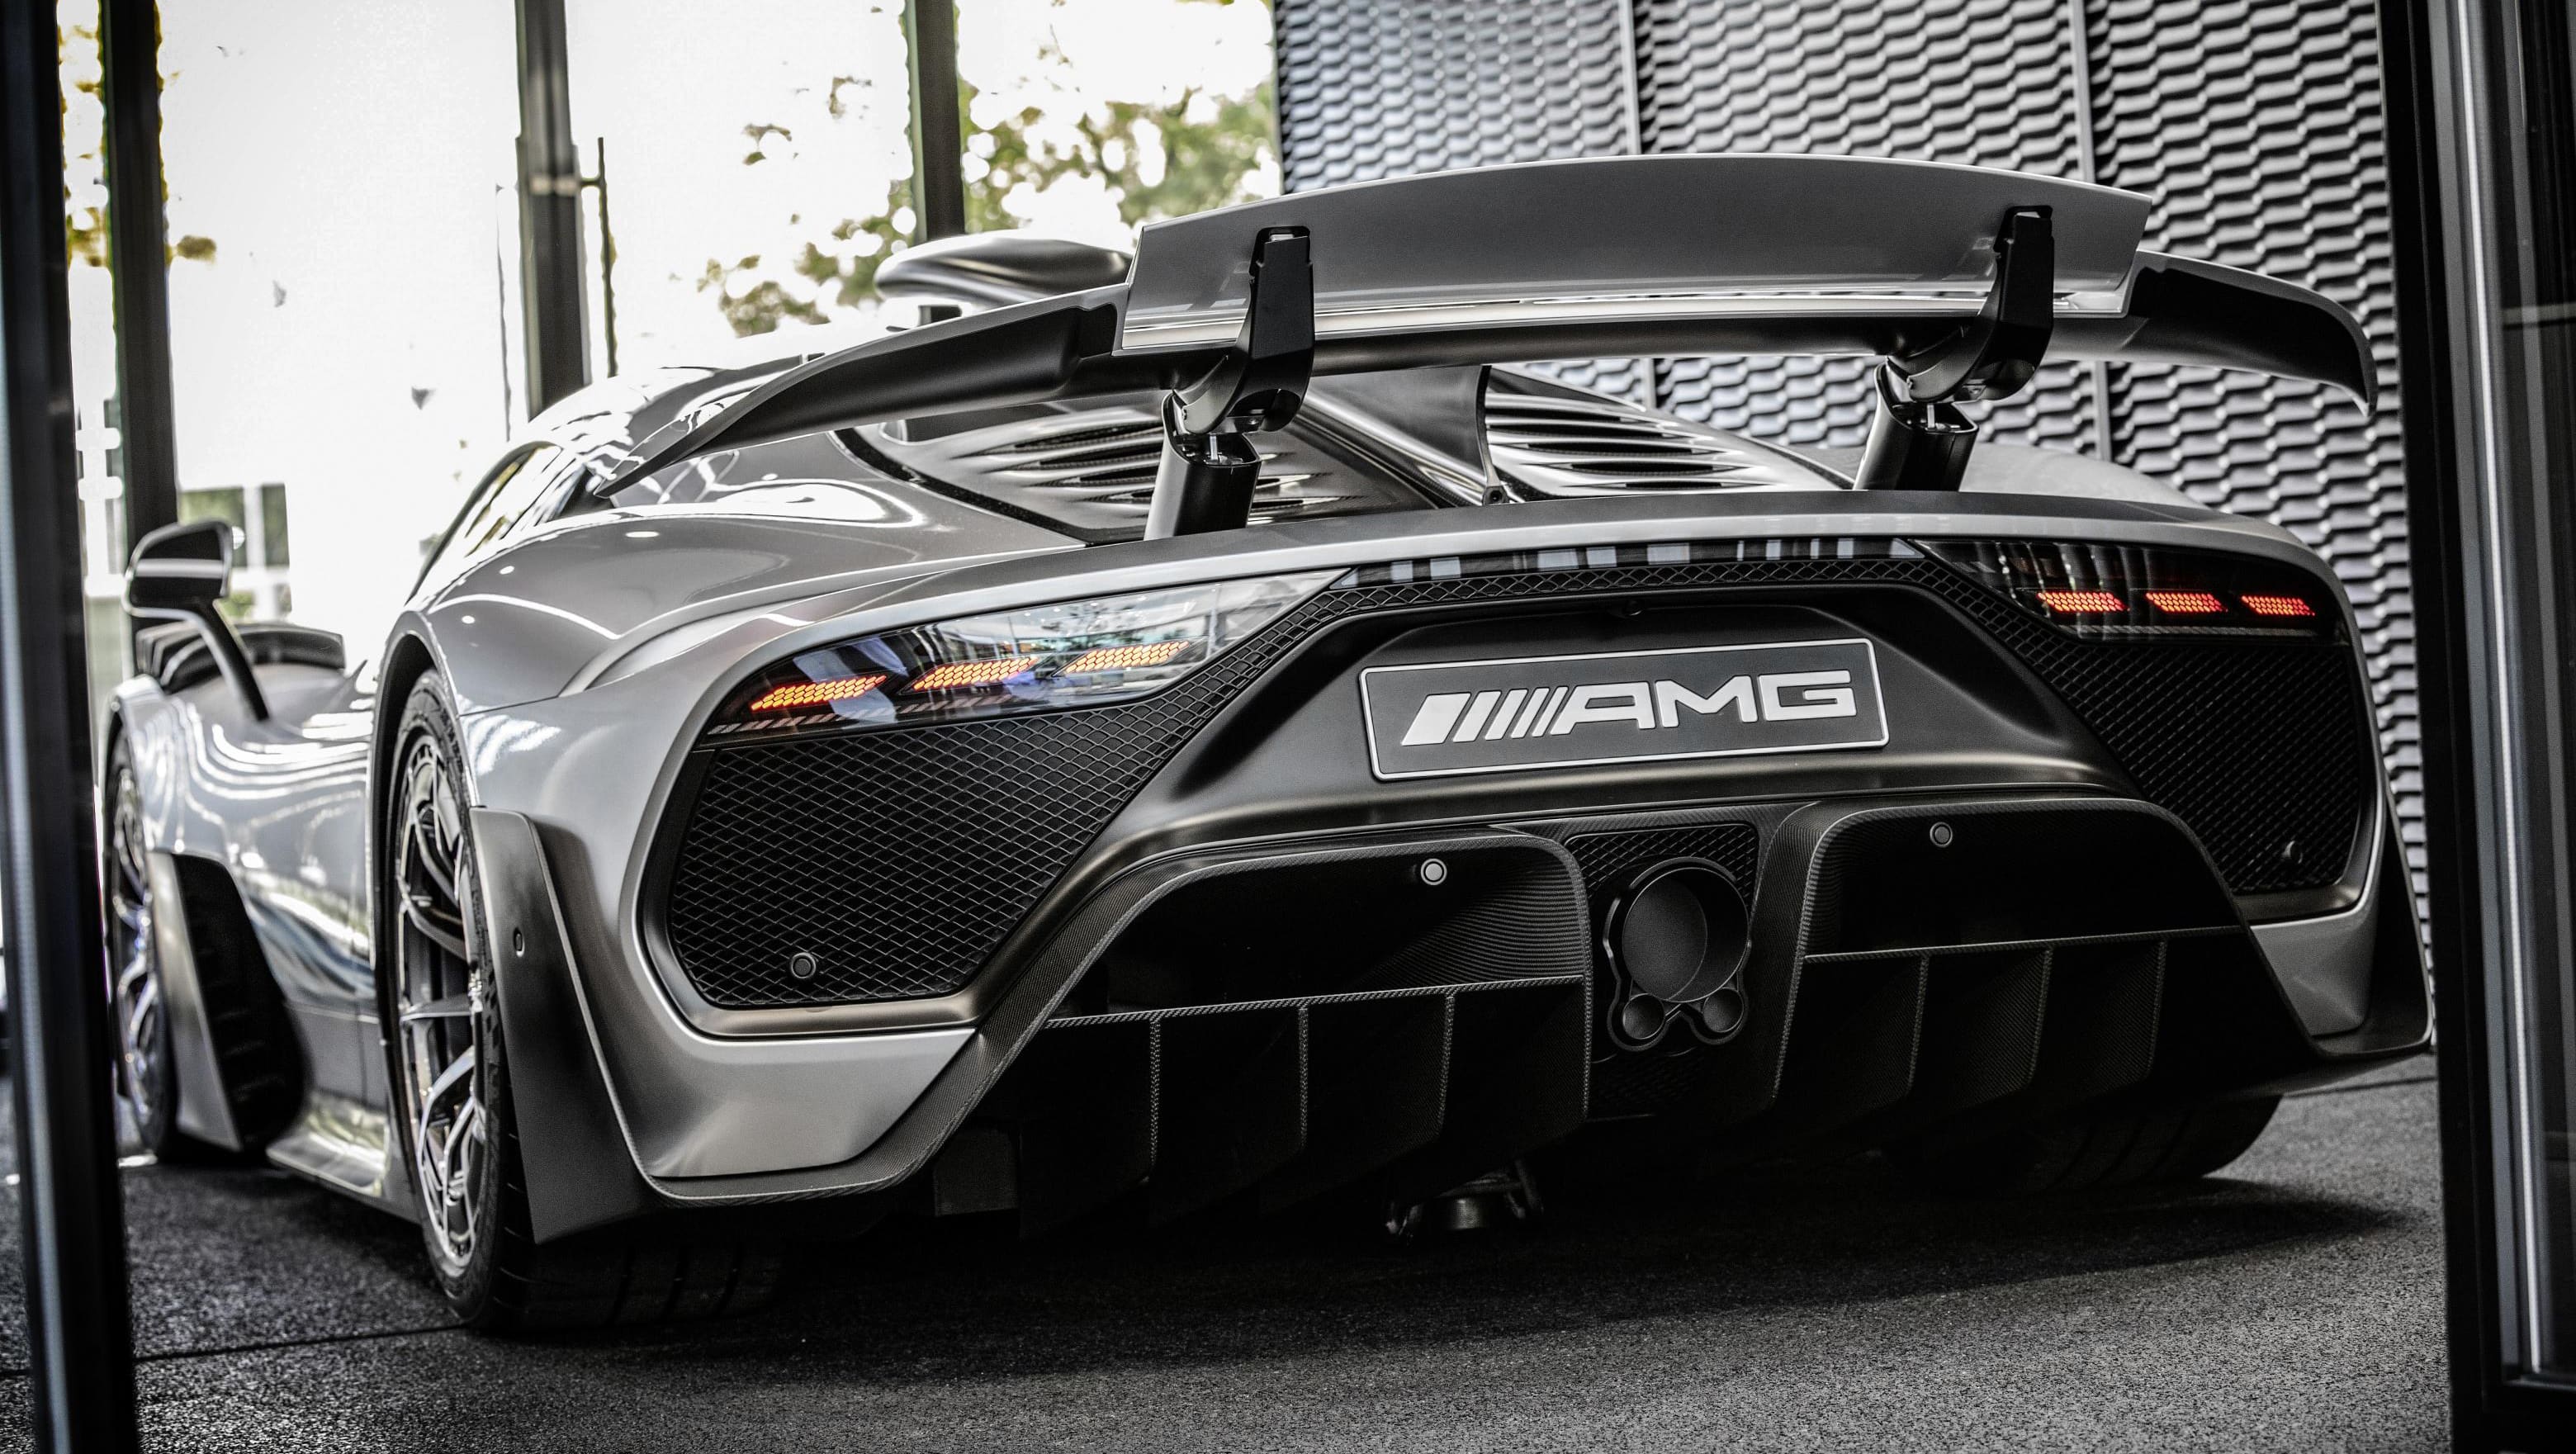 Mercedes-AMG One 2019: Benz goes with ONE name for ...